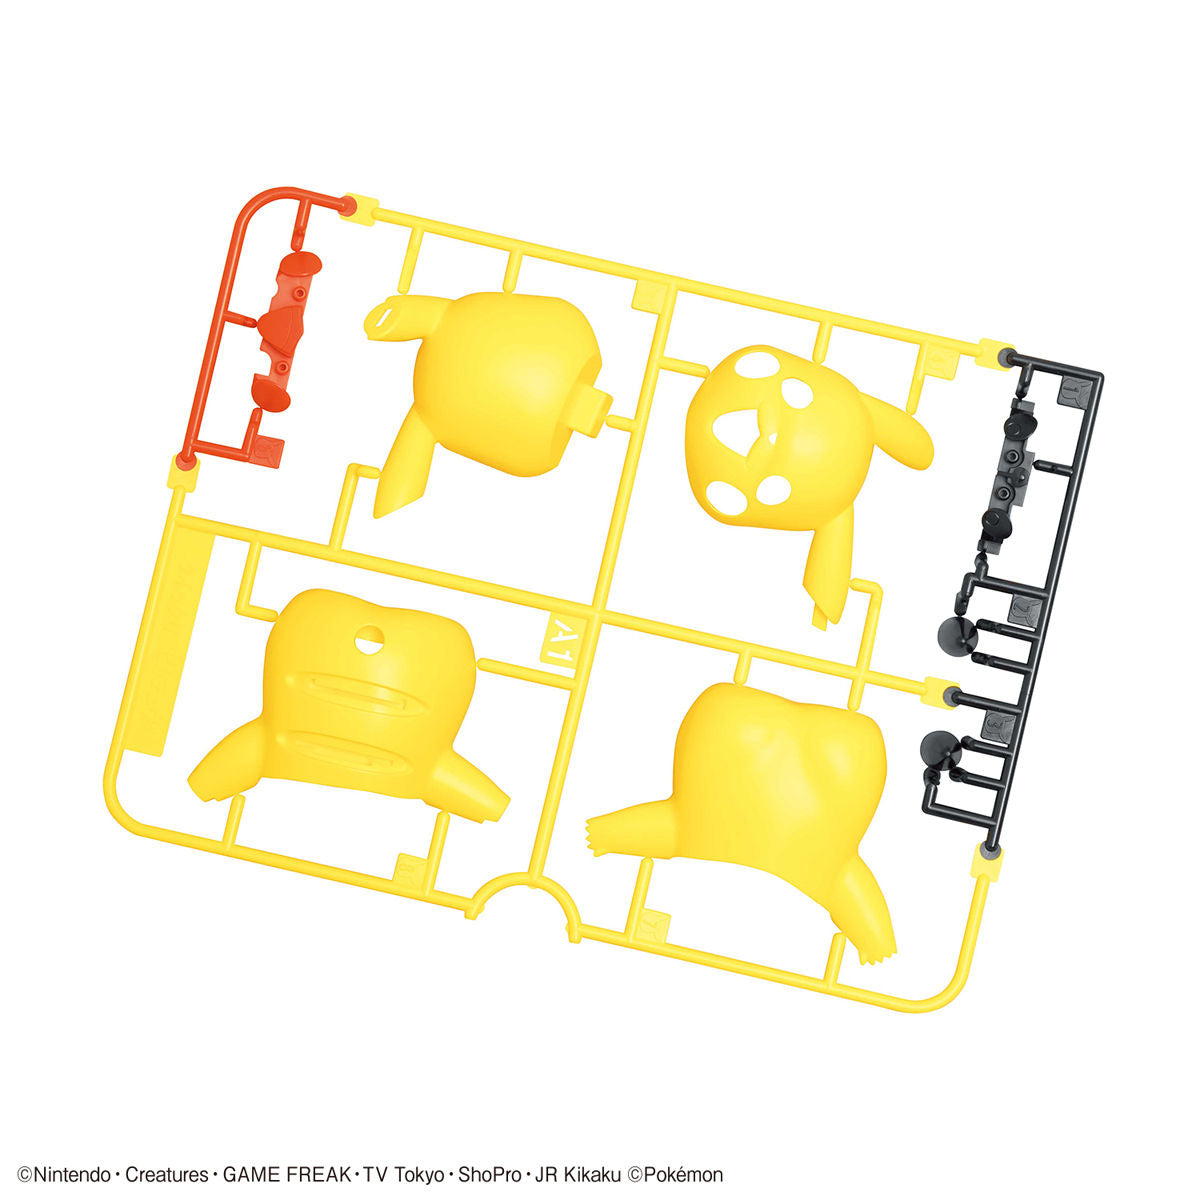 Pokémon - Pikachu - Pokémon Model Kit Quick!! Collection No. 01 (Bandai), Easy and simple assembly, Pikachu model approximately 75mm in length with 15 parts, no tools required, minimal use of stickers, Nippon Figures